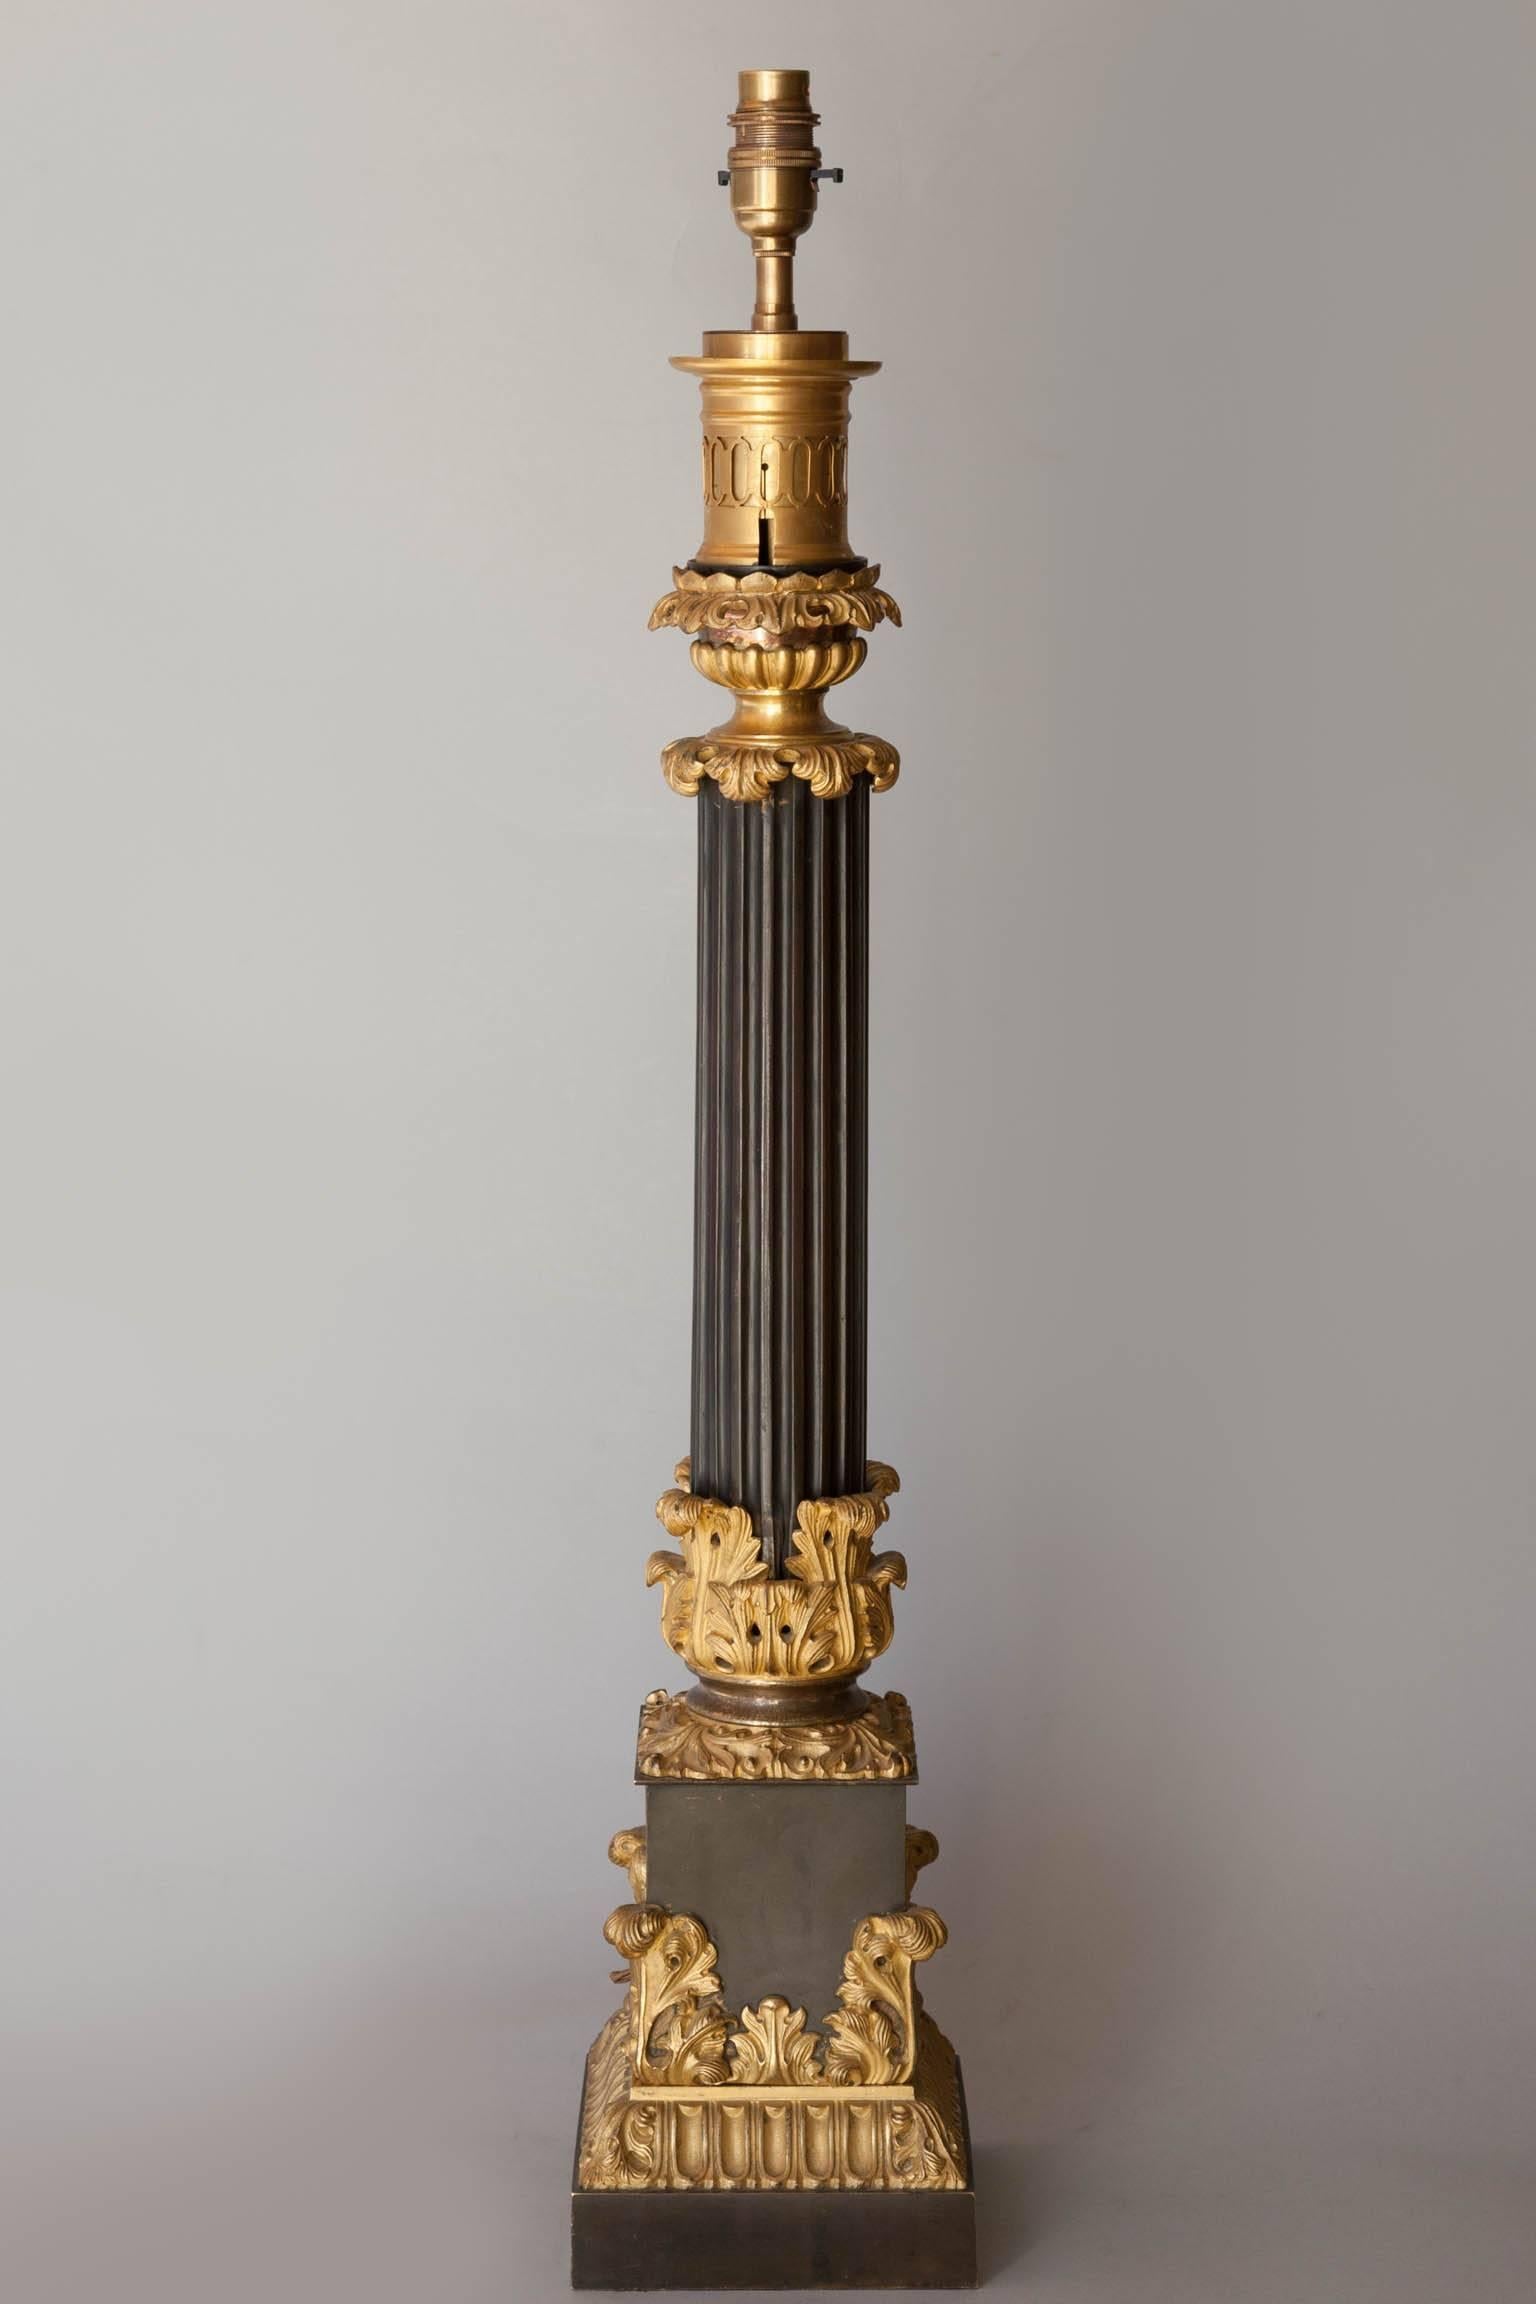 Tole and gilt bronze carcel lamp converted to a table lamp with ormolu acanthus leaf decoration on the central fluted column and plinth.
France, circa 1830. Currently electrified for the UK.
Shown with a 24" gathered rough silk shade available